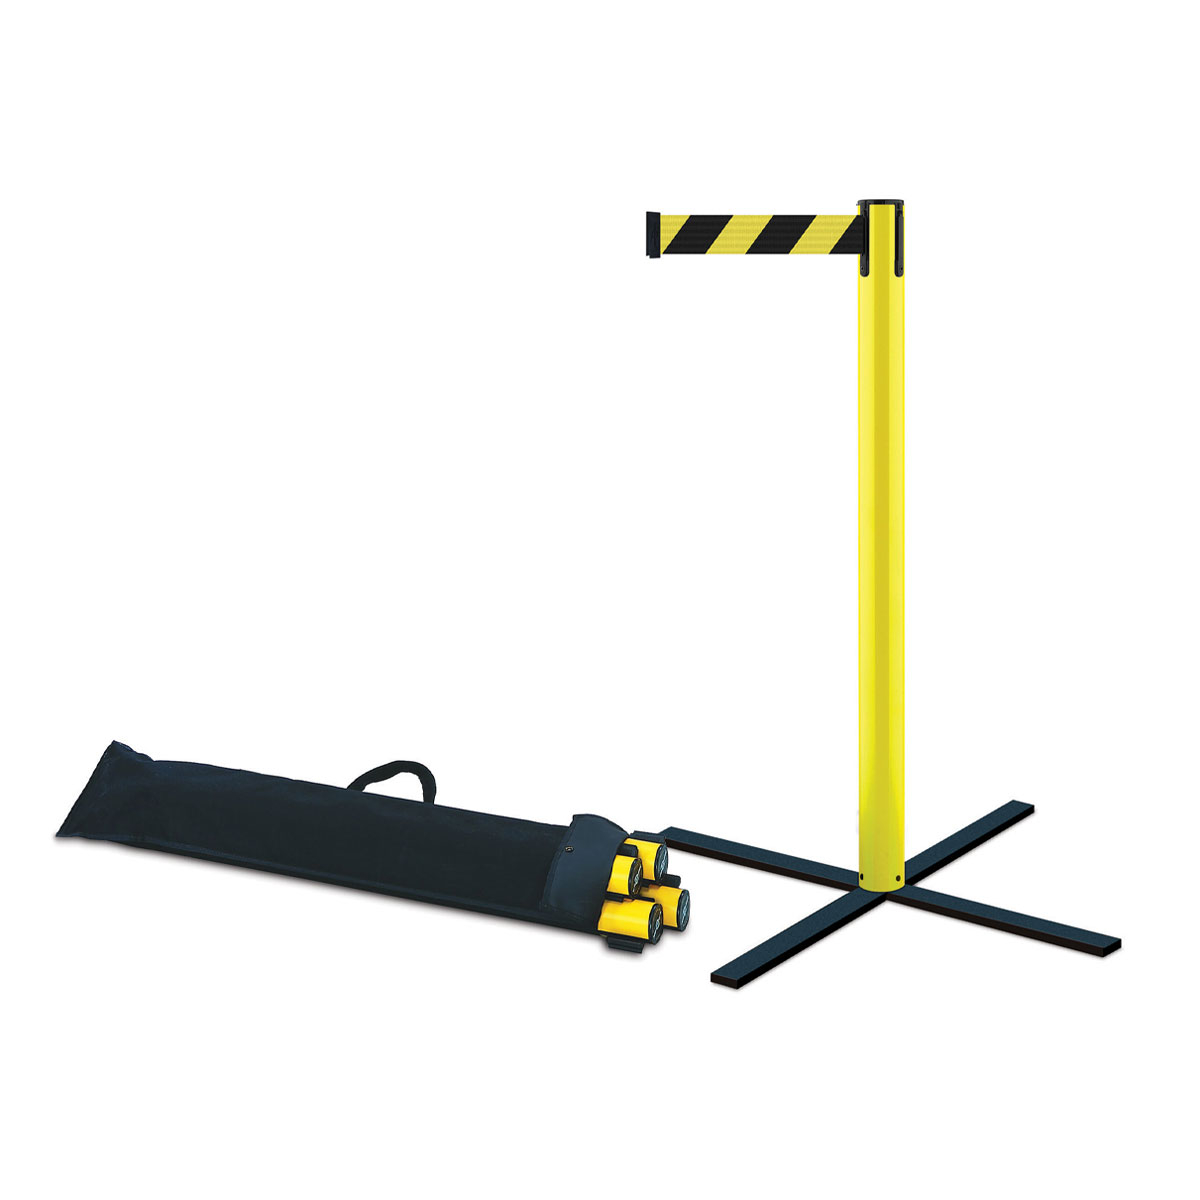 Tensabarrier® Stowaway Portable Safety Barrier KIT Is Available in Two High-Visibility Colours - Red And Yellow